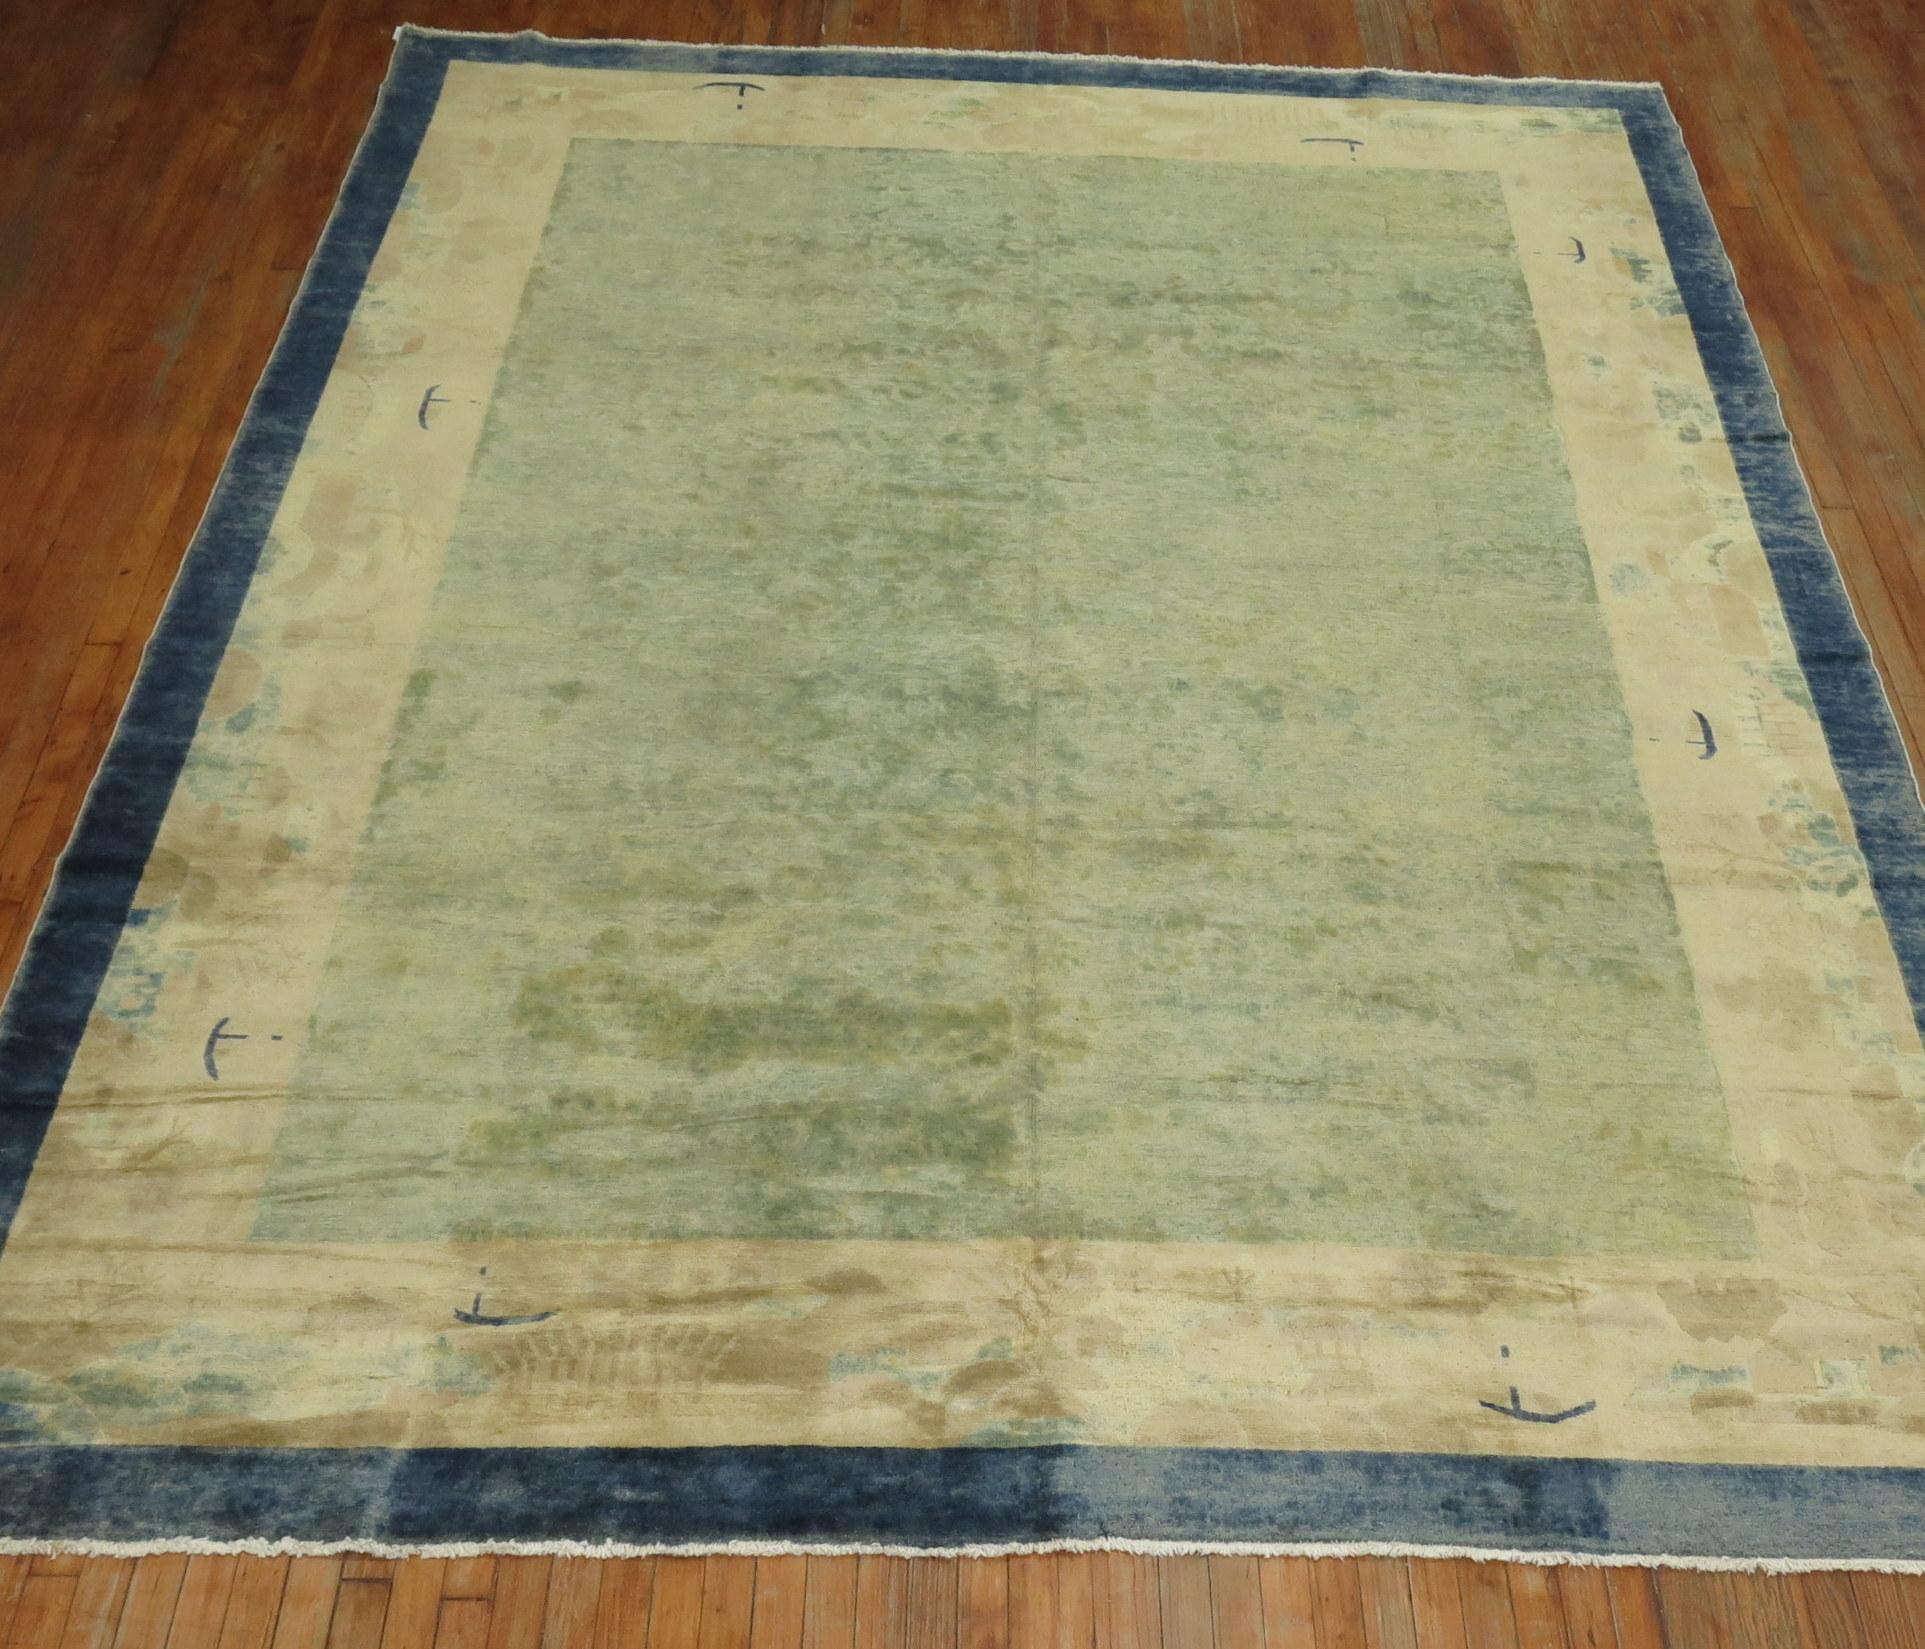 An early 20th century room size Chinese rug in various shades of blue. The wool and feel of the rug is very soft on the feet. It has a silky sheen to it as well.